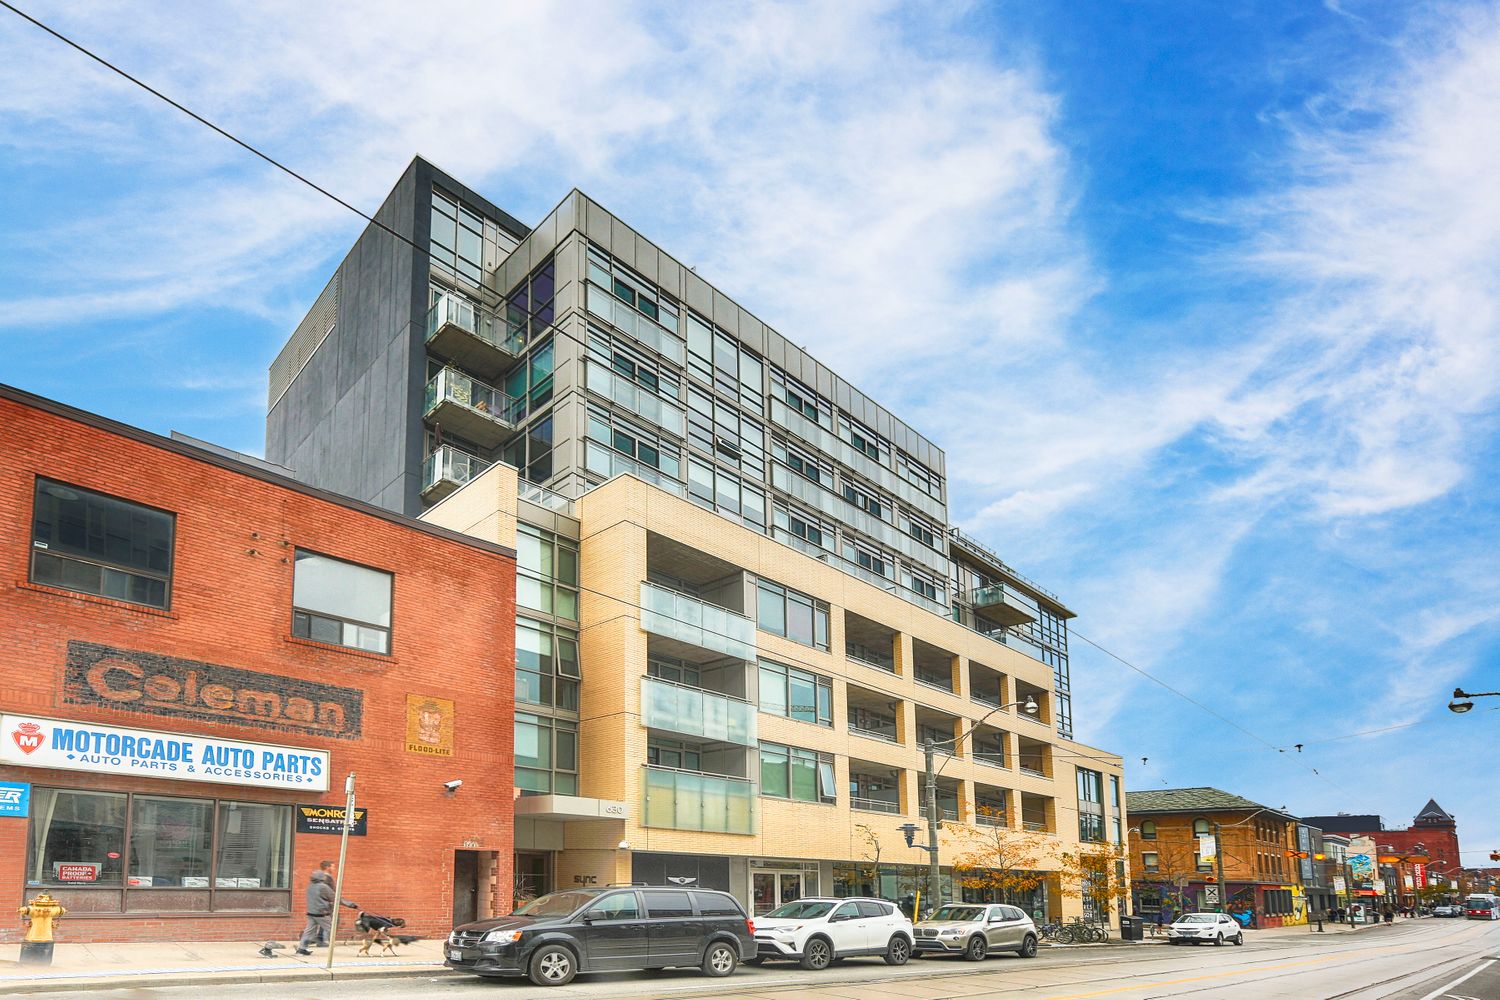 630 Queen Street E. Sync Lofts is located in  East End, Toronto - image #2 of 6